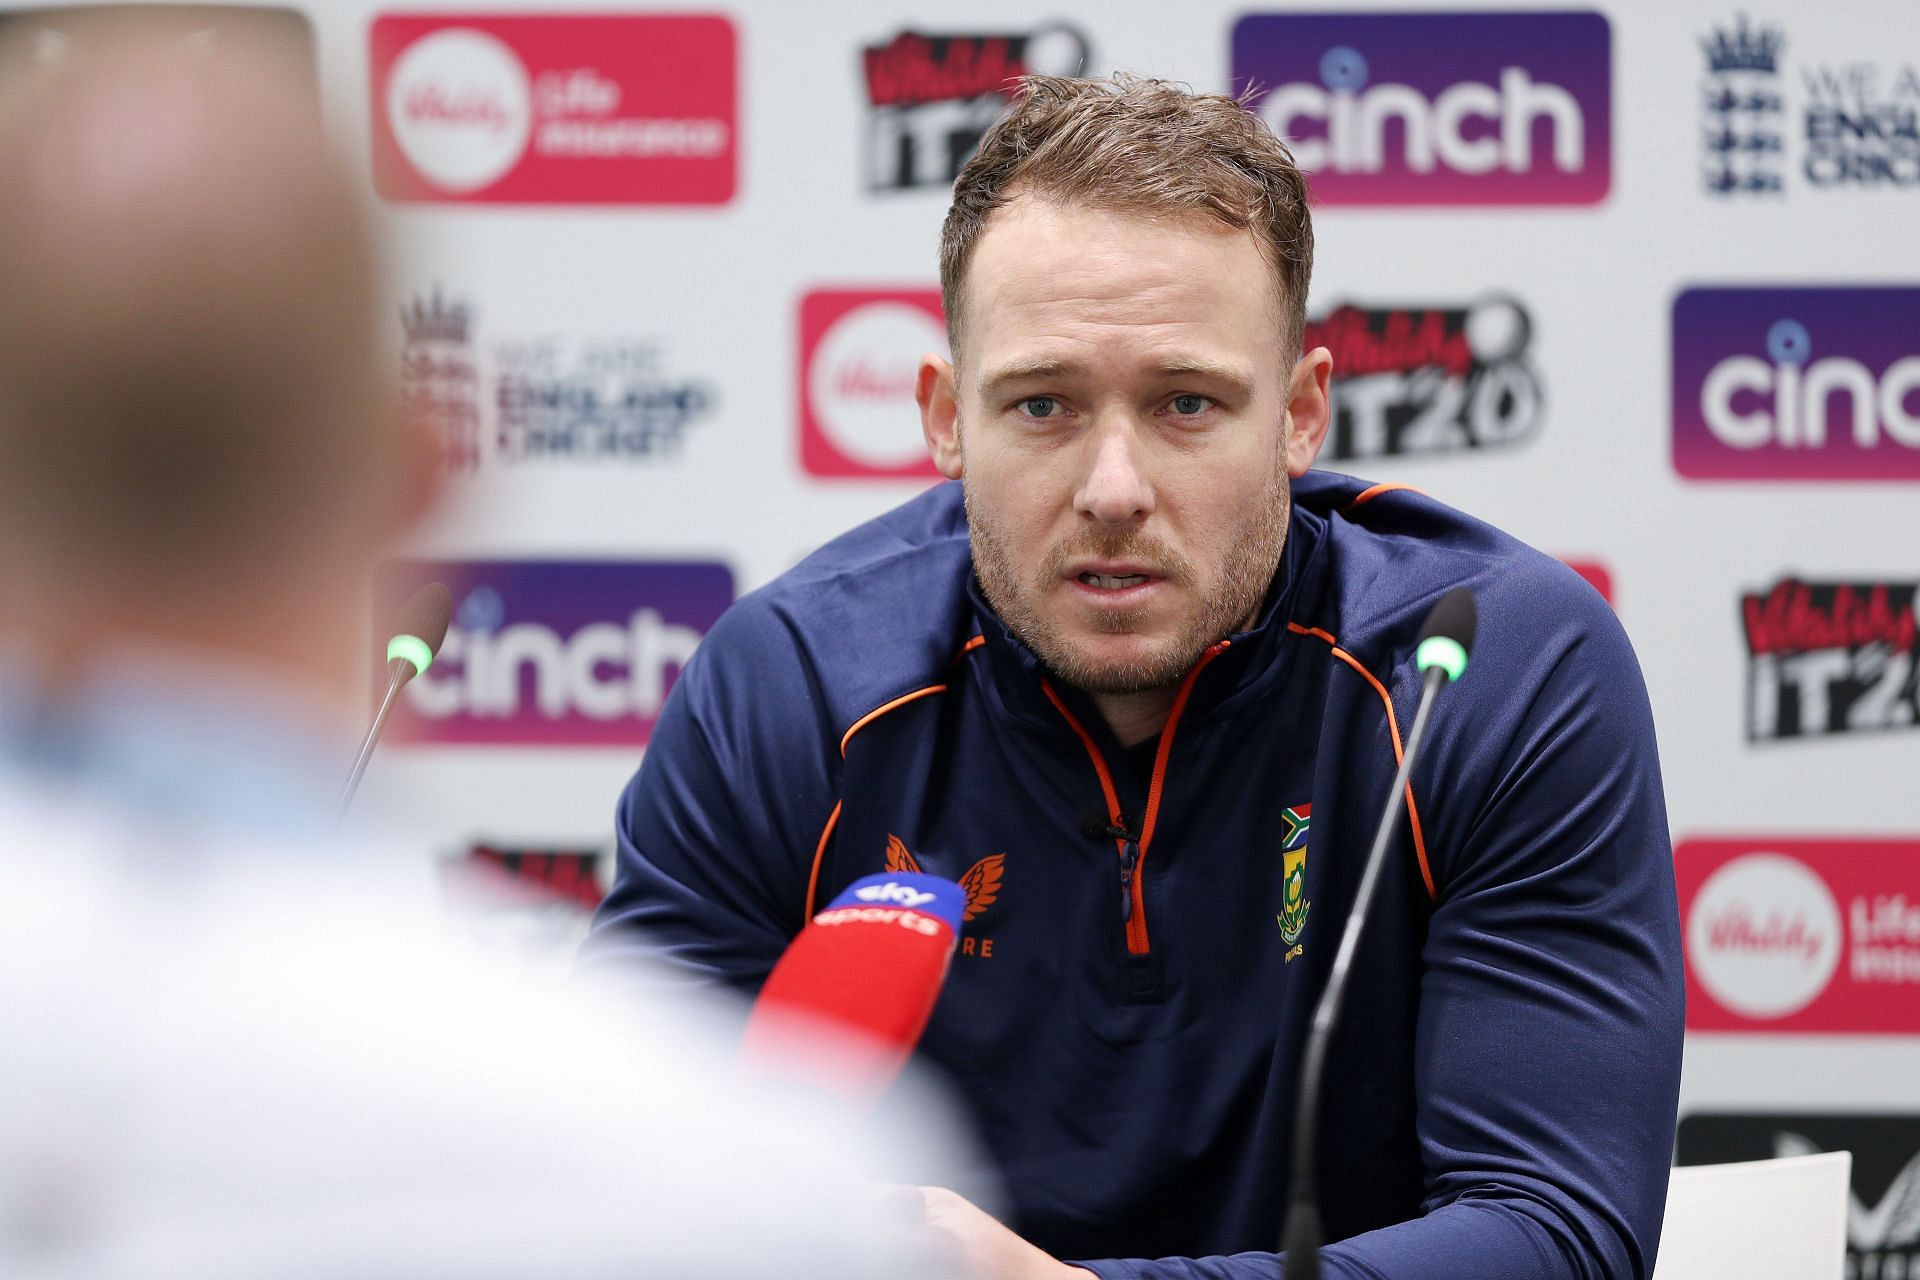 David Miller addressing the press ahead of the T20I series against England. (P.C.:Getty)